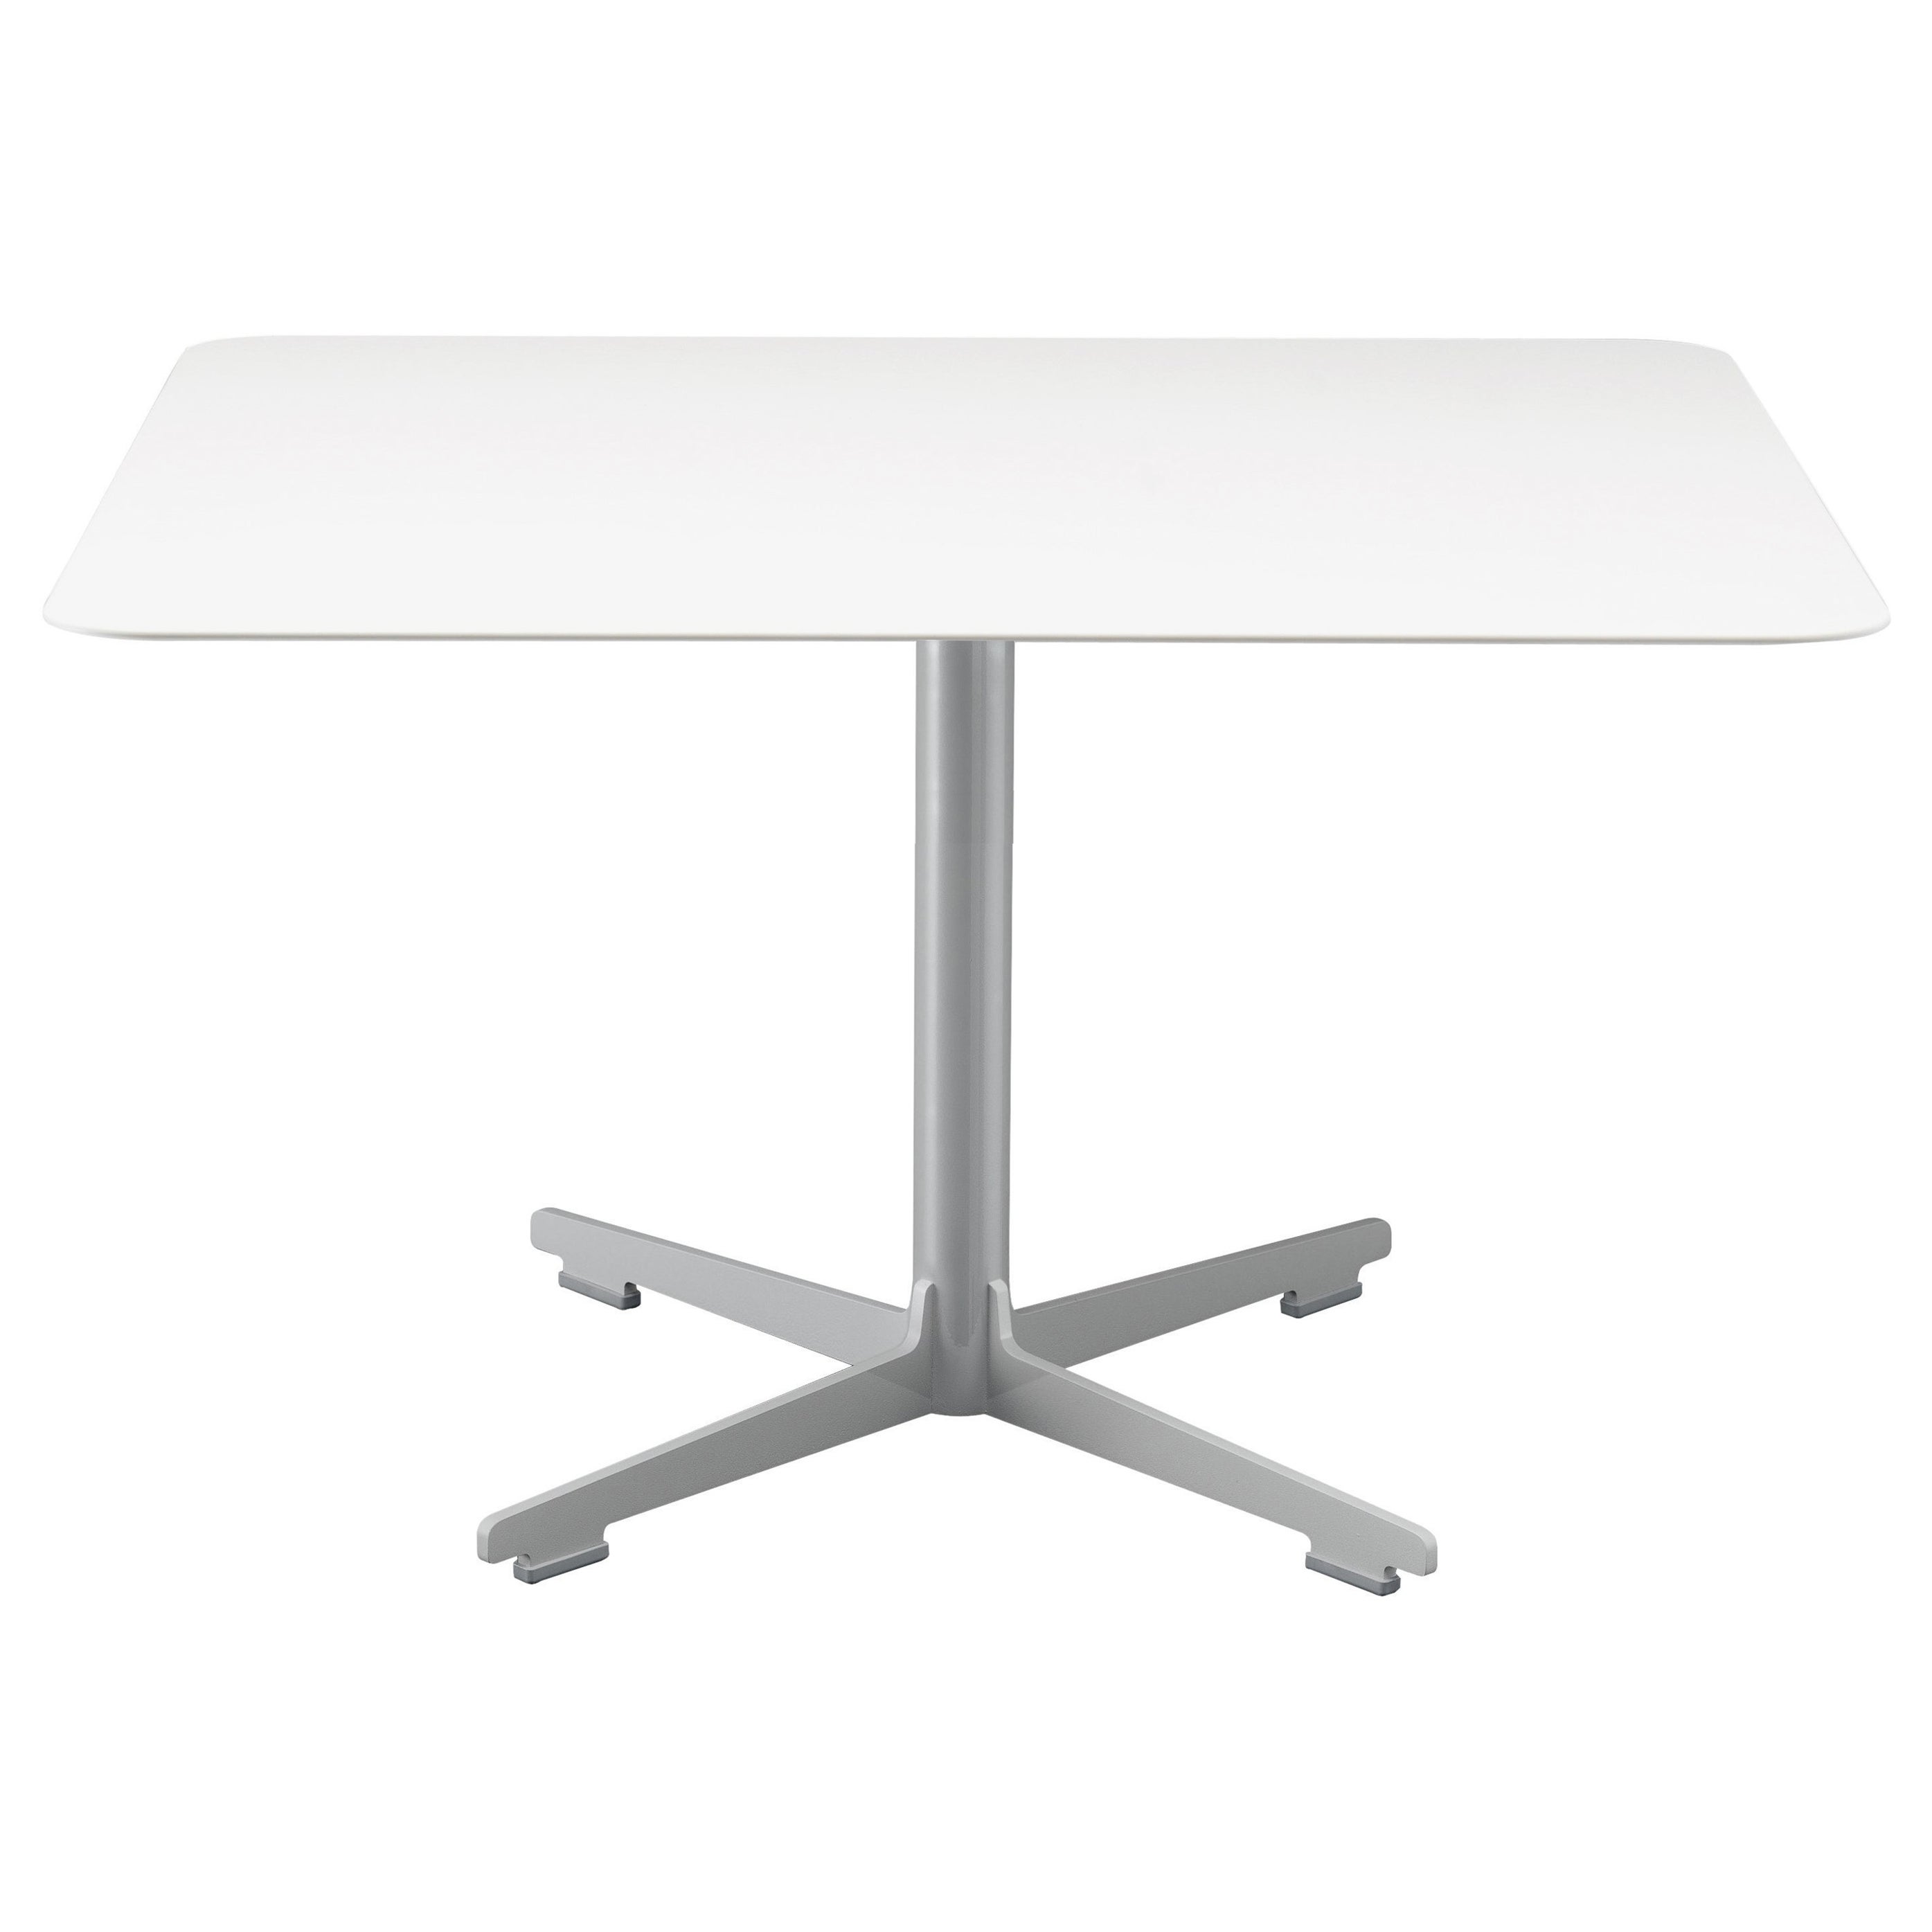 Alias Small 577 Cross Table with Light Grey Top and Lacquered Steel Base